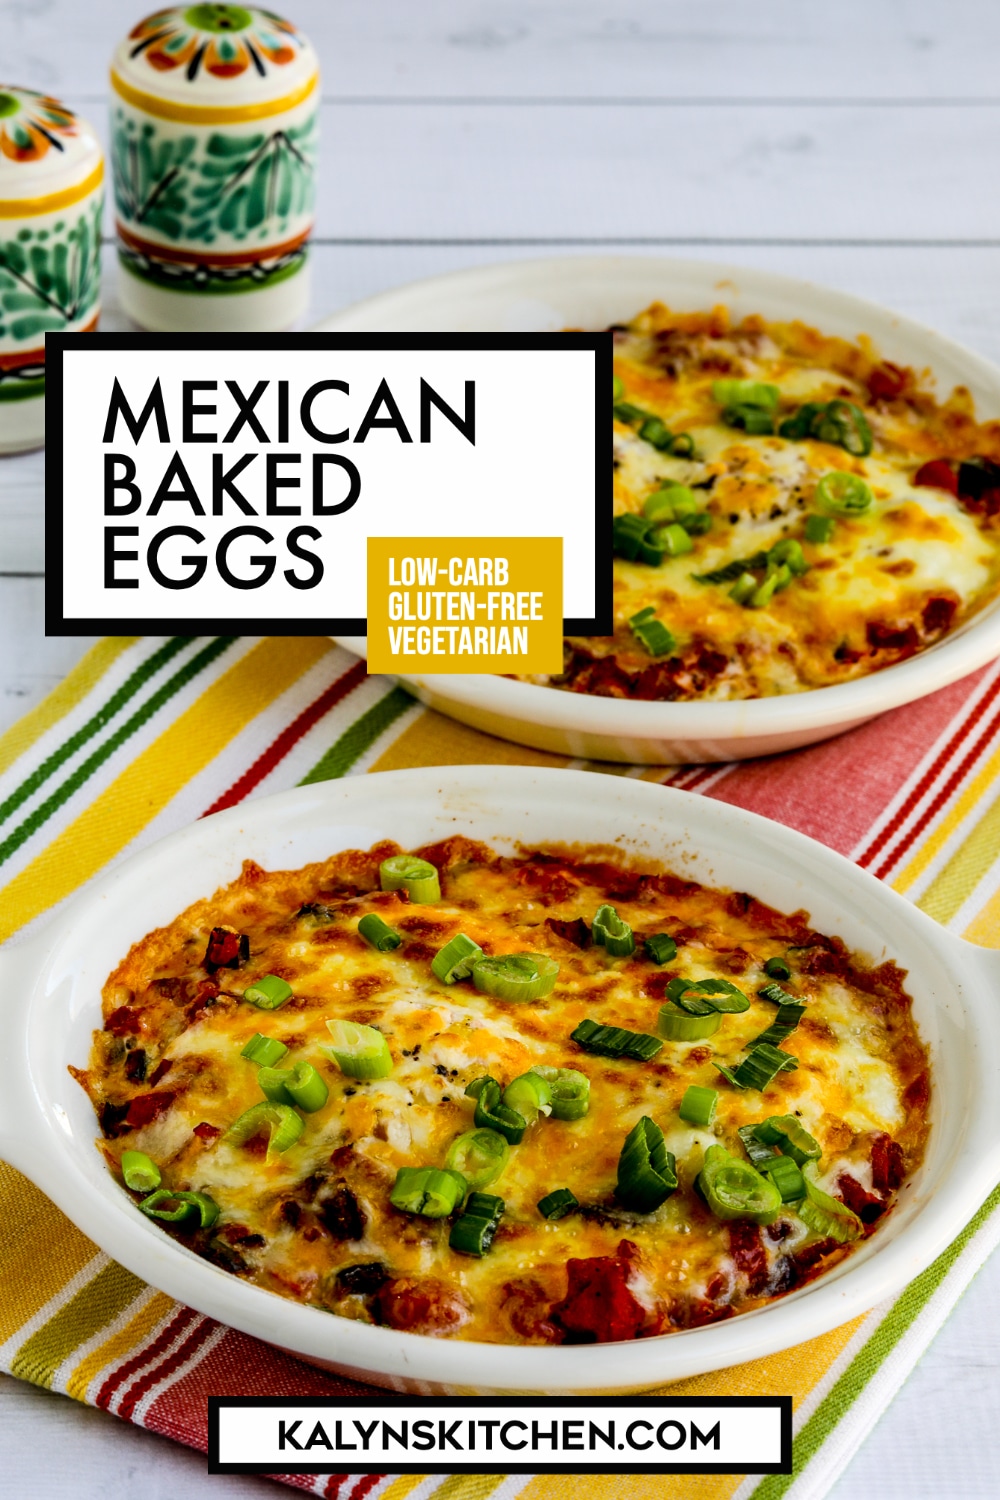 Pinterest image of Mexican Baked Eggs